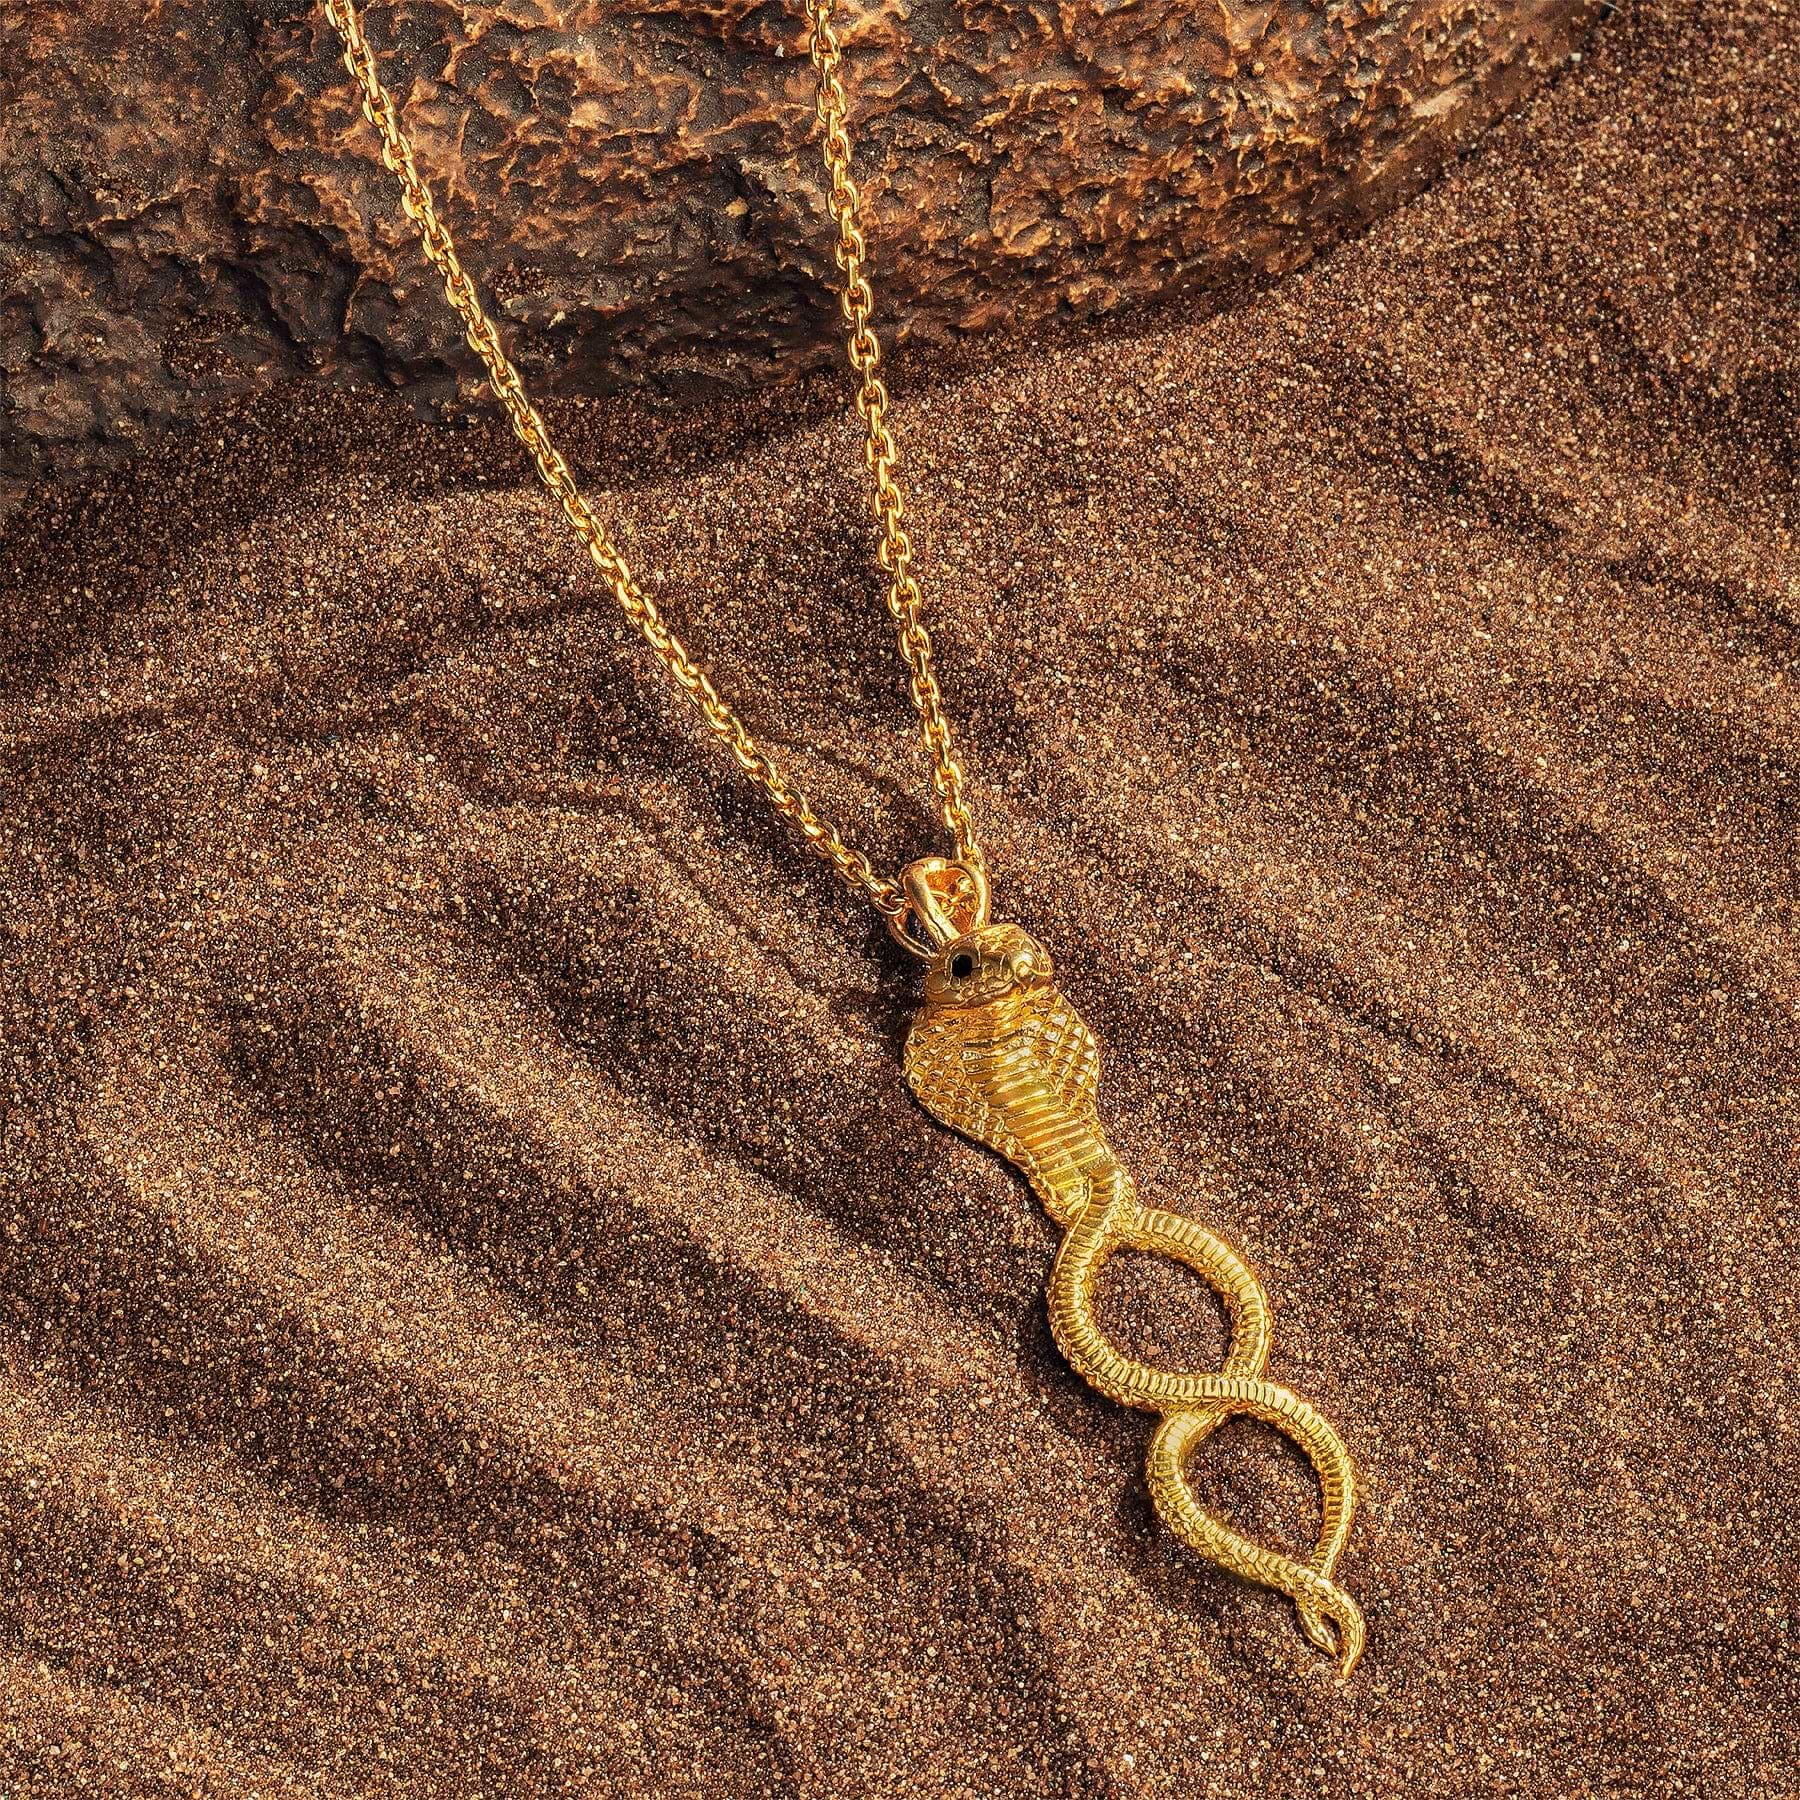 Karma and Luck  Necklaces - Mens  -  Empowering Protection - Cobra Infinity Onyx Pendant Necklace